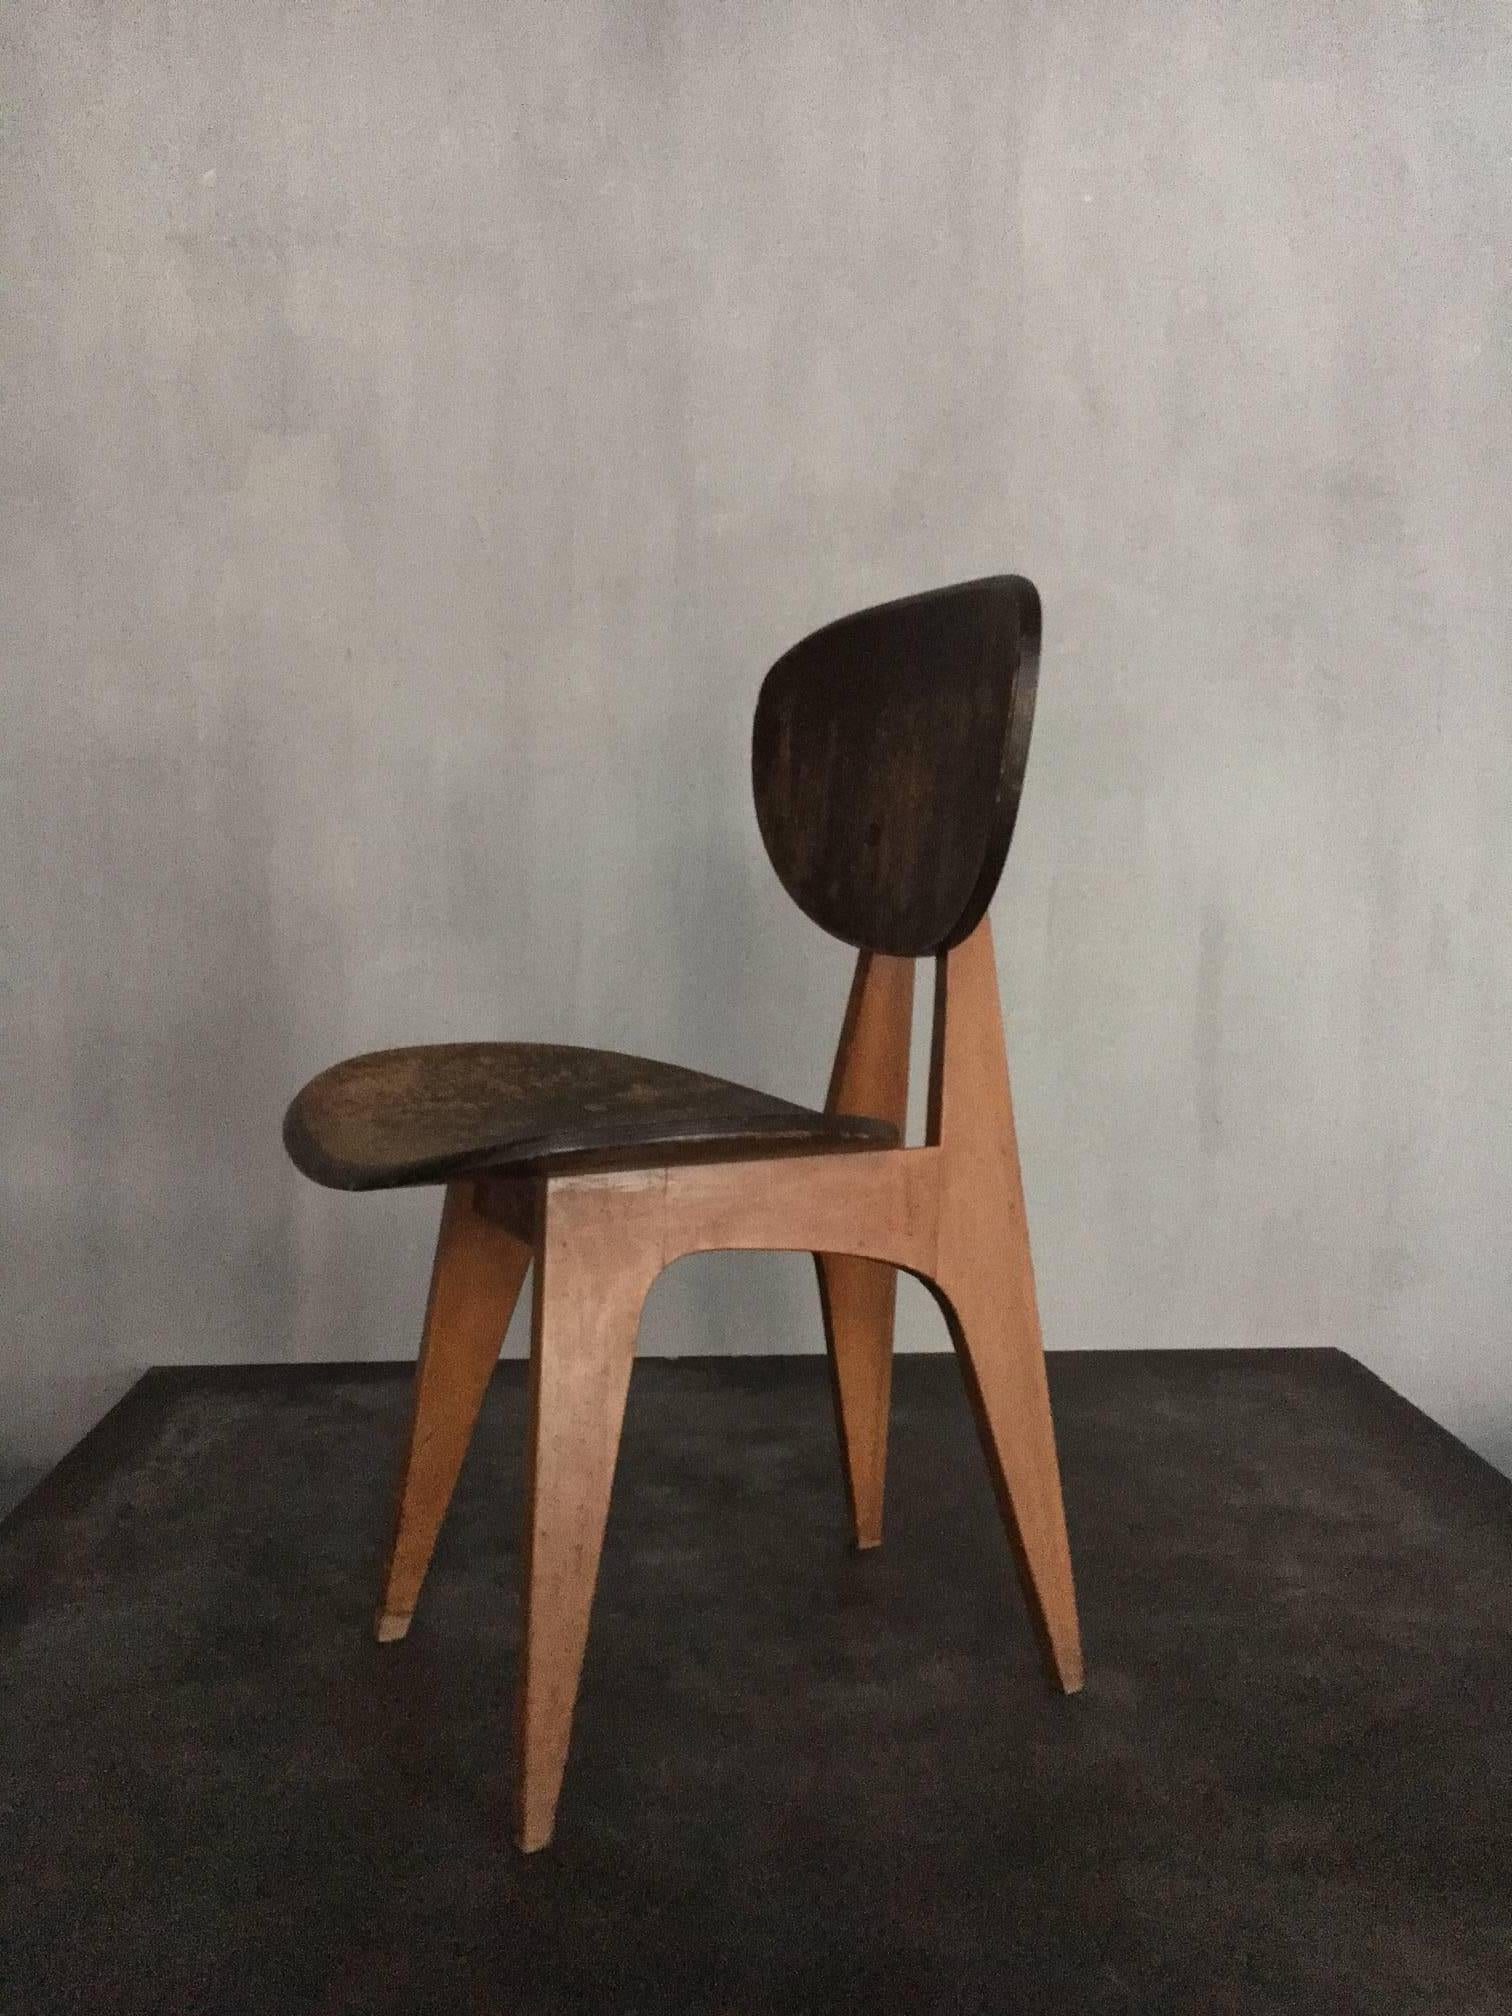 Pair of wooden chairs from the 1950s by the Japanese architect Junzo Sakakura. Sold as a pair.
Please note: This item is located in our New York City Studio and will be shipped from there.